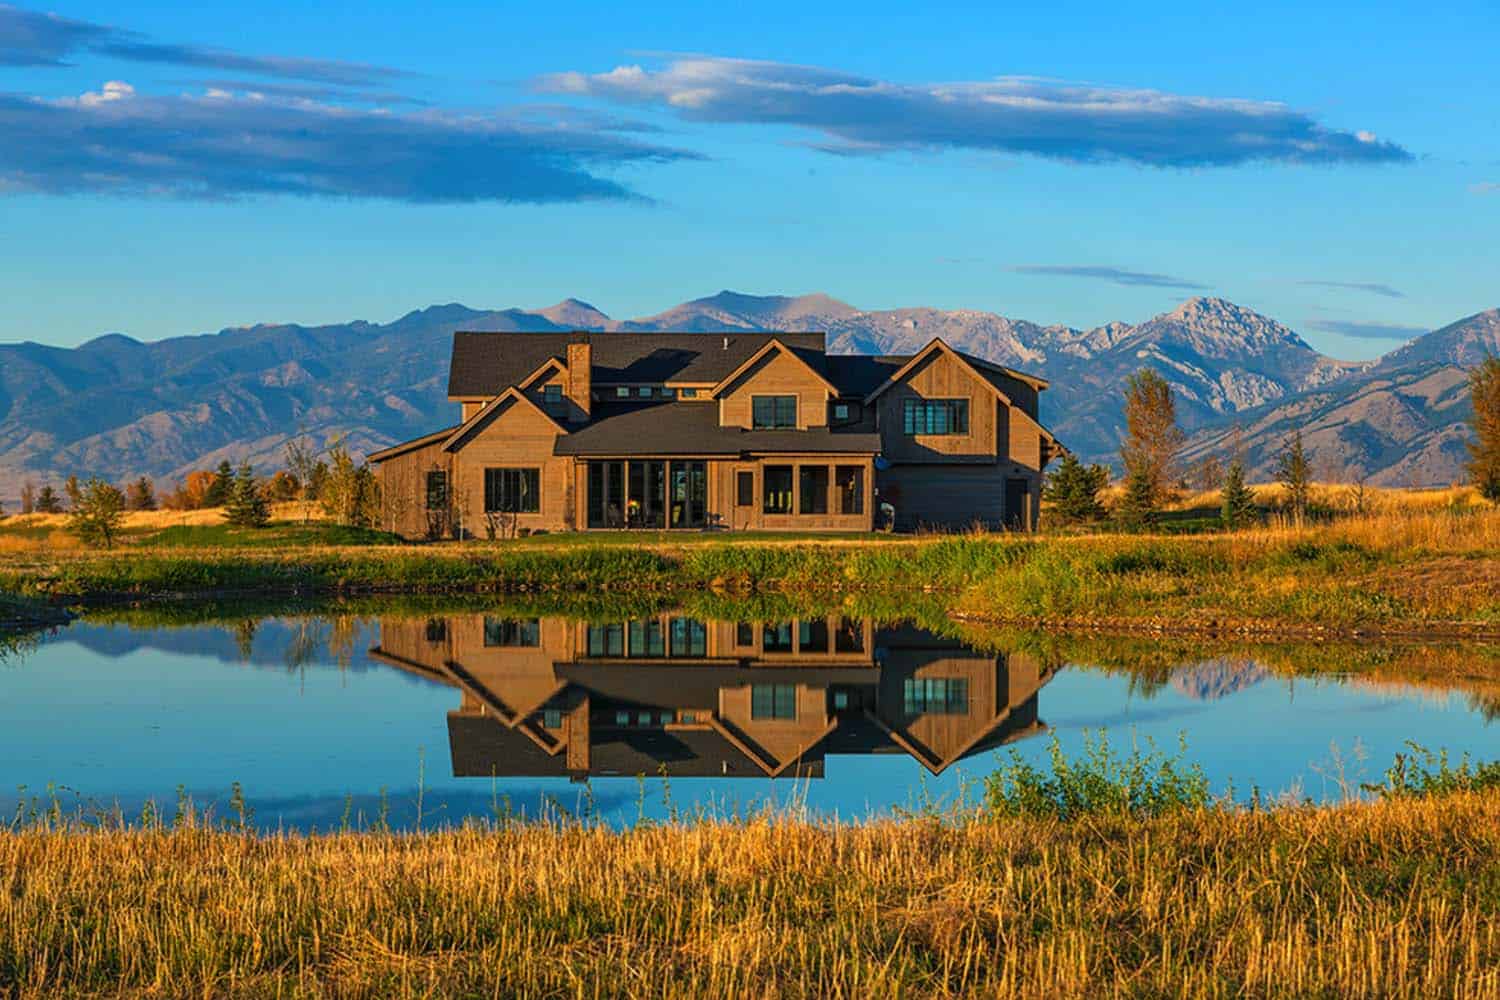 Modern farmhouse in Montana with surprising details throughout